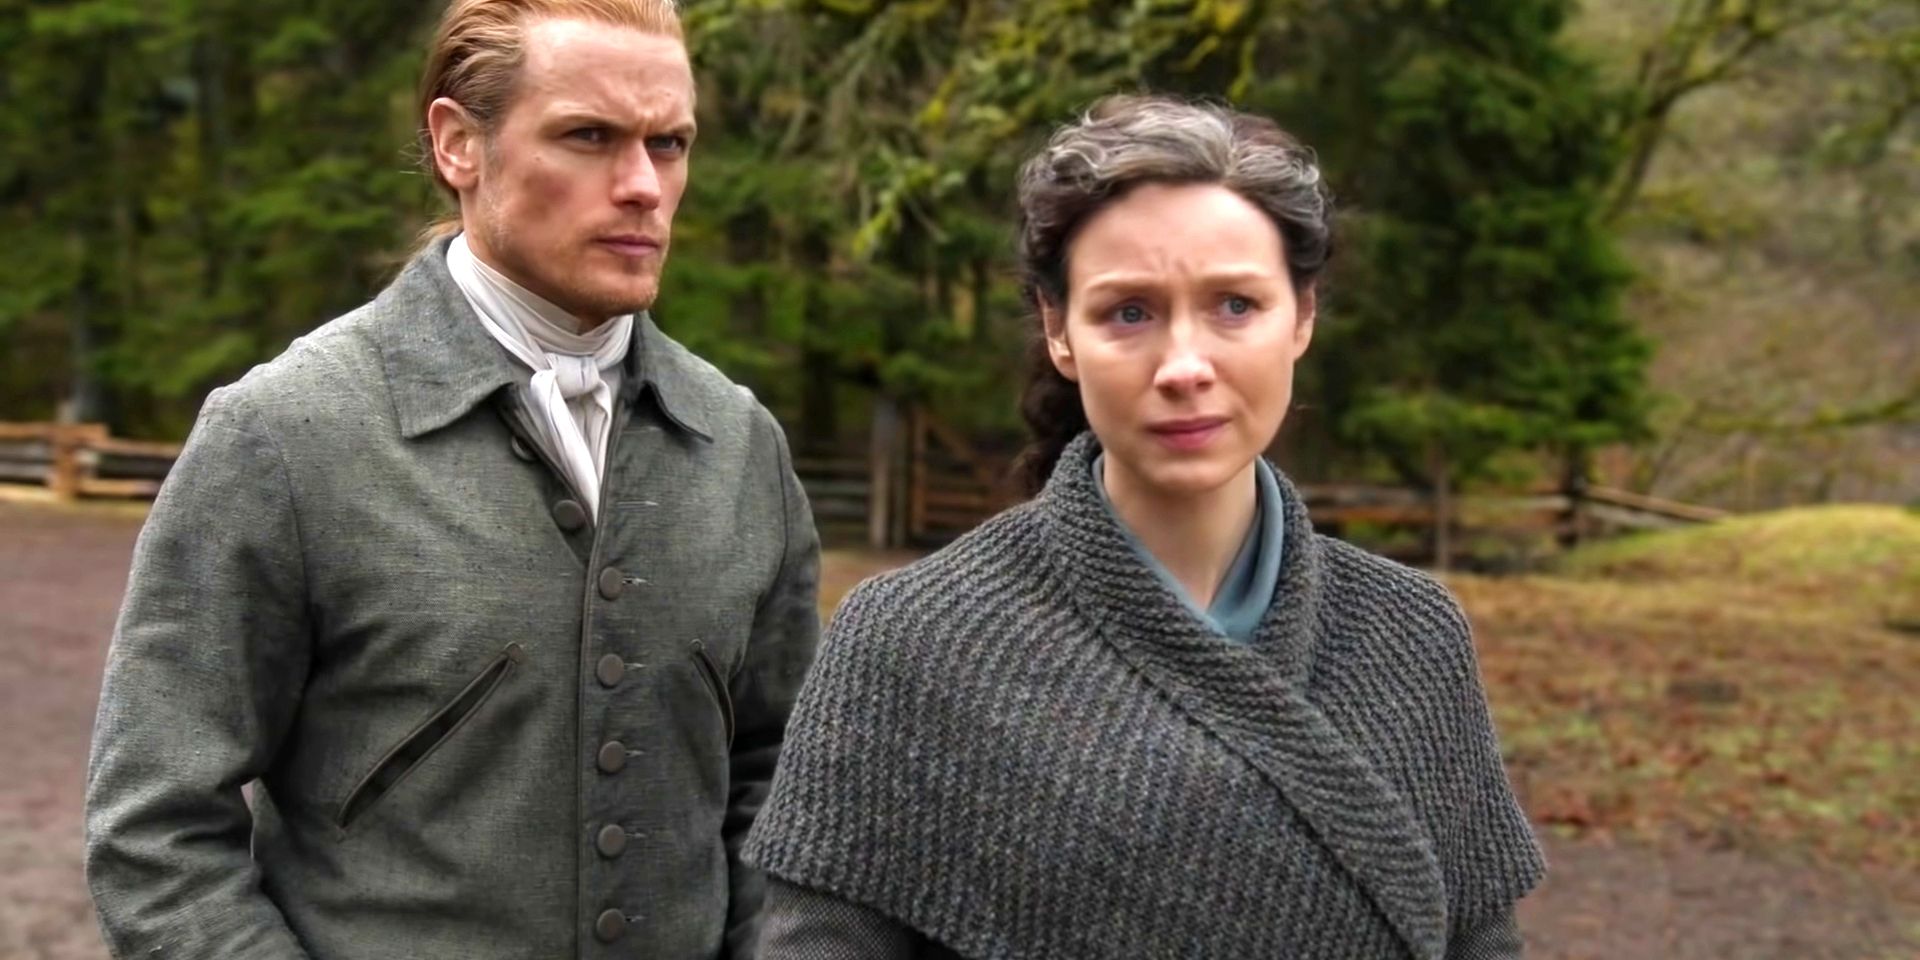 Outlander Season 6 Finds Claire at Her Most Vulnerable Says Star